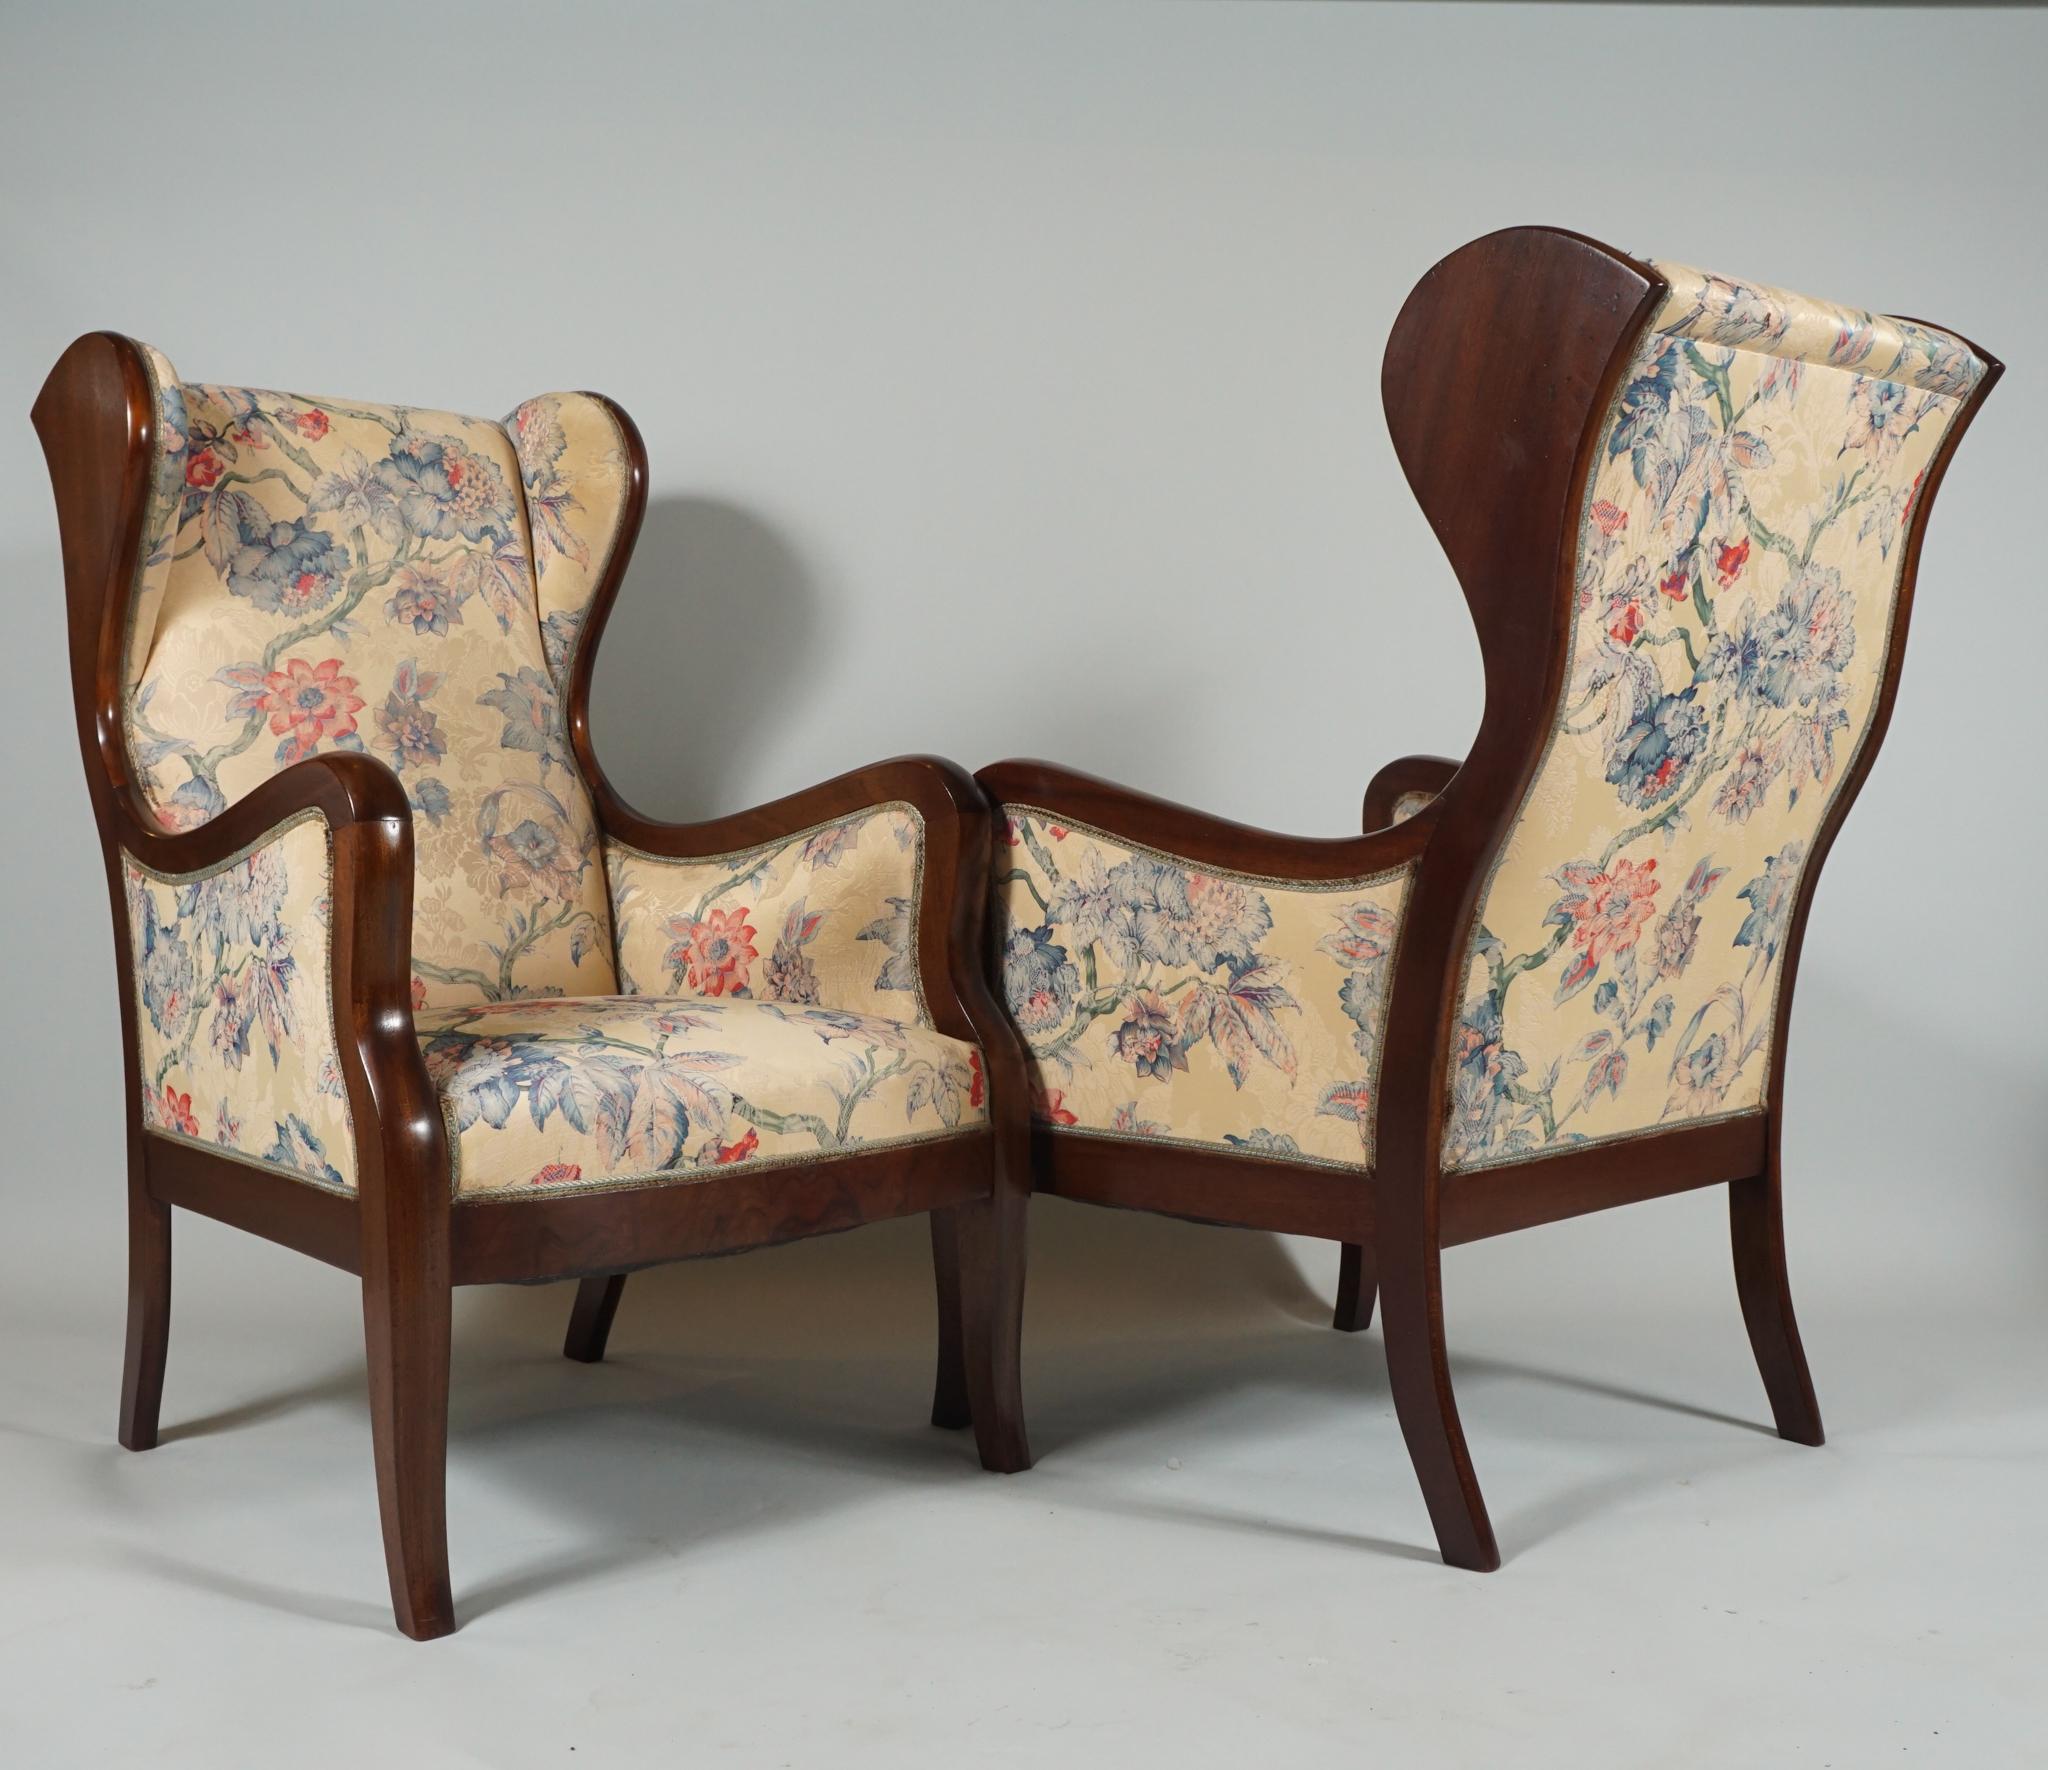 This pair of elegant mahogany-frame armchairs are by Danish Modern Designer, Frits Henningsen,
likely from 1930's. 

Frits Henningsen (1889–1965) was a Danish furniture designer and cabinet maker who achieved high standards of quality with